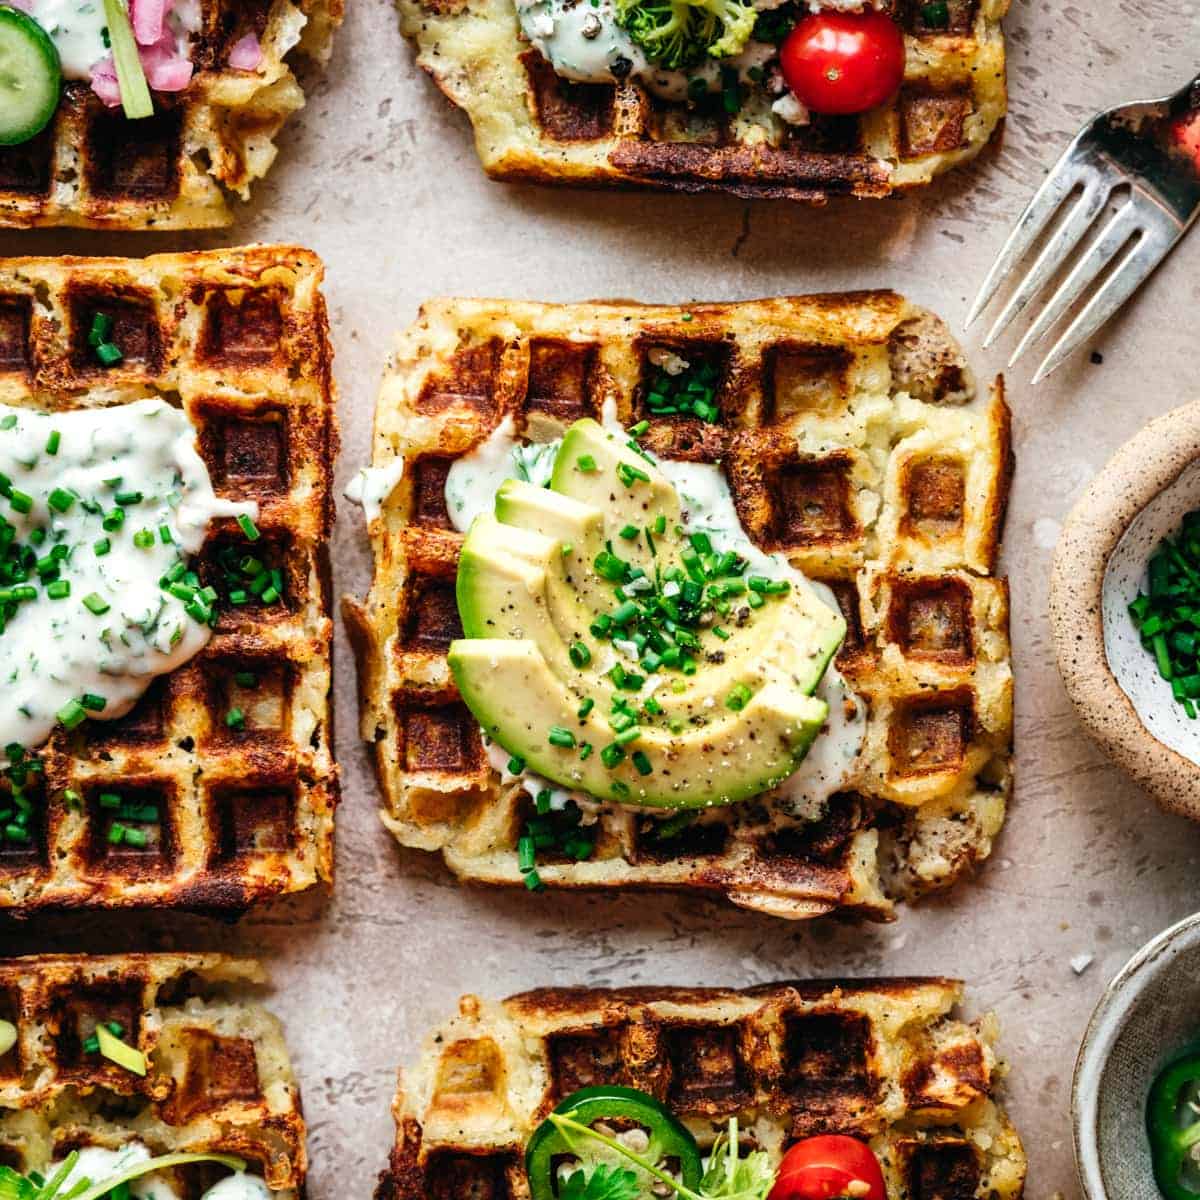 Overhead view of mashed potato waffles on a sand-colored tabletop, with avocado slides on top as garnish.